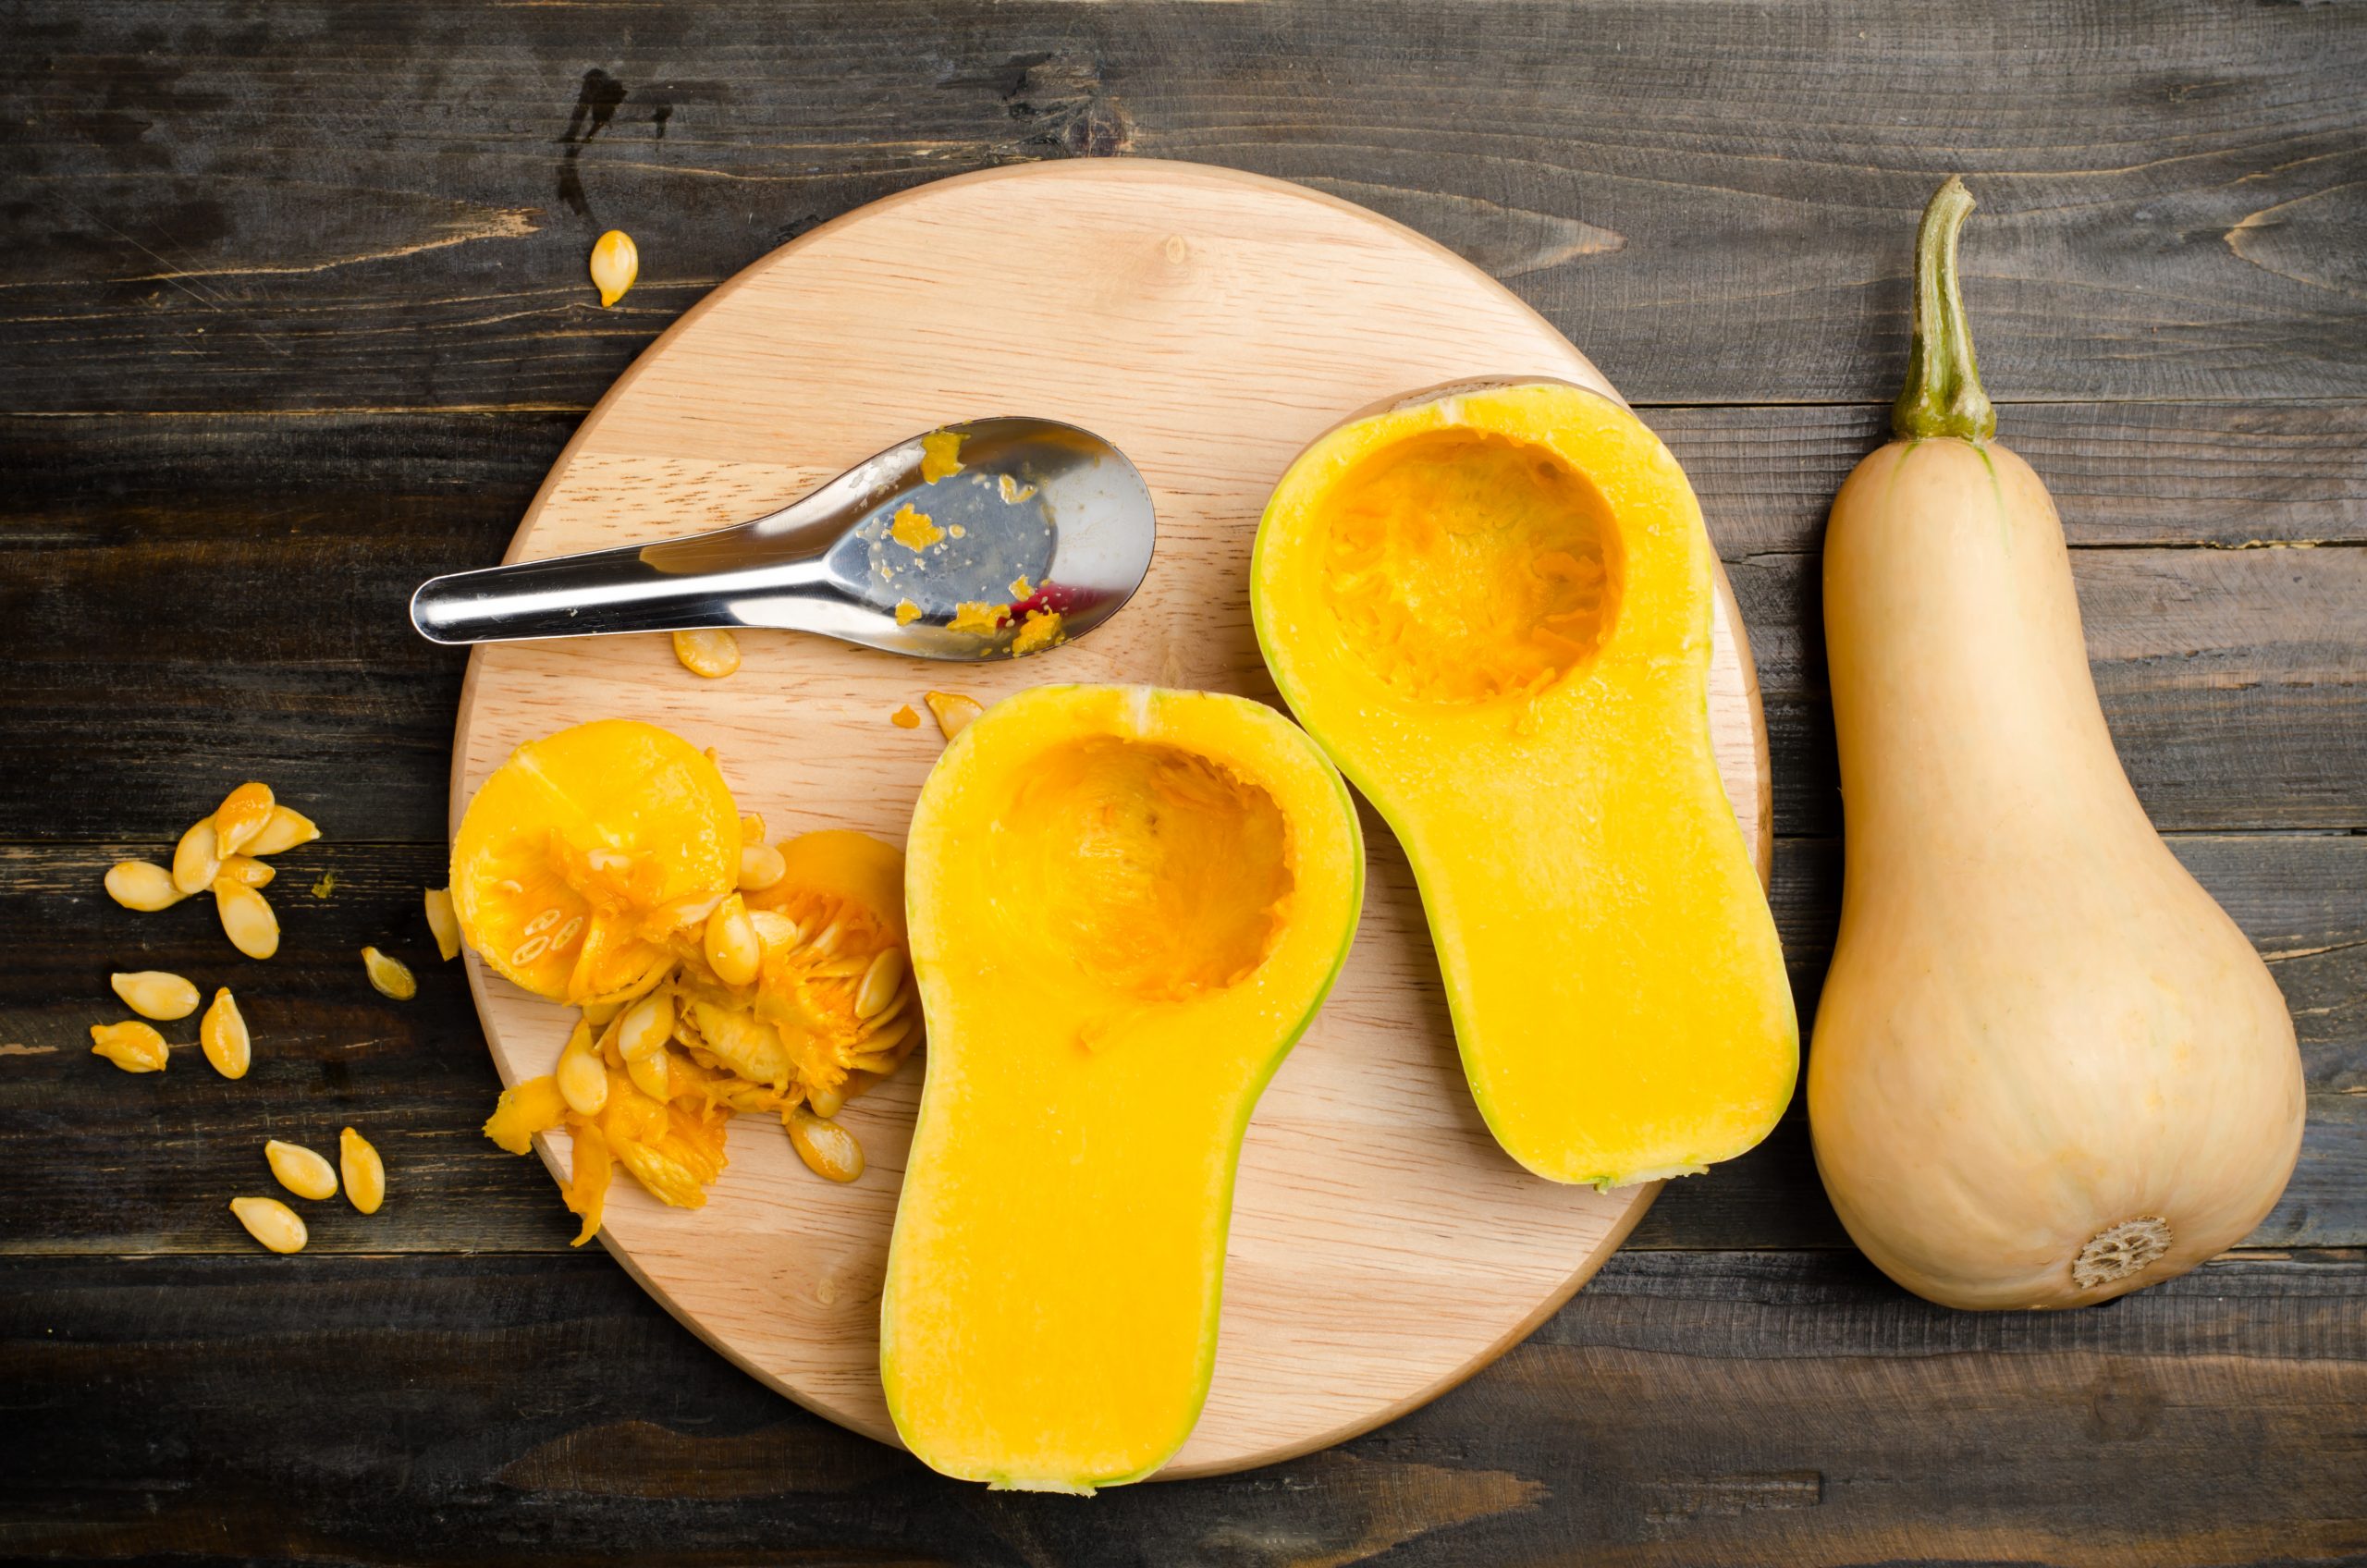 What are the health benefits of squash for diabetes?